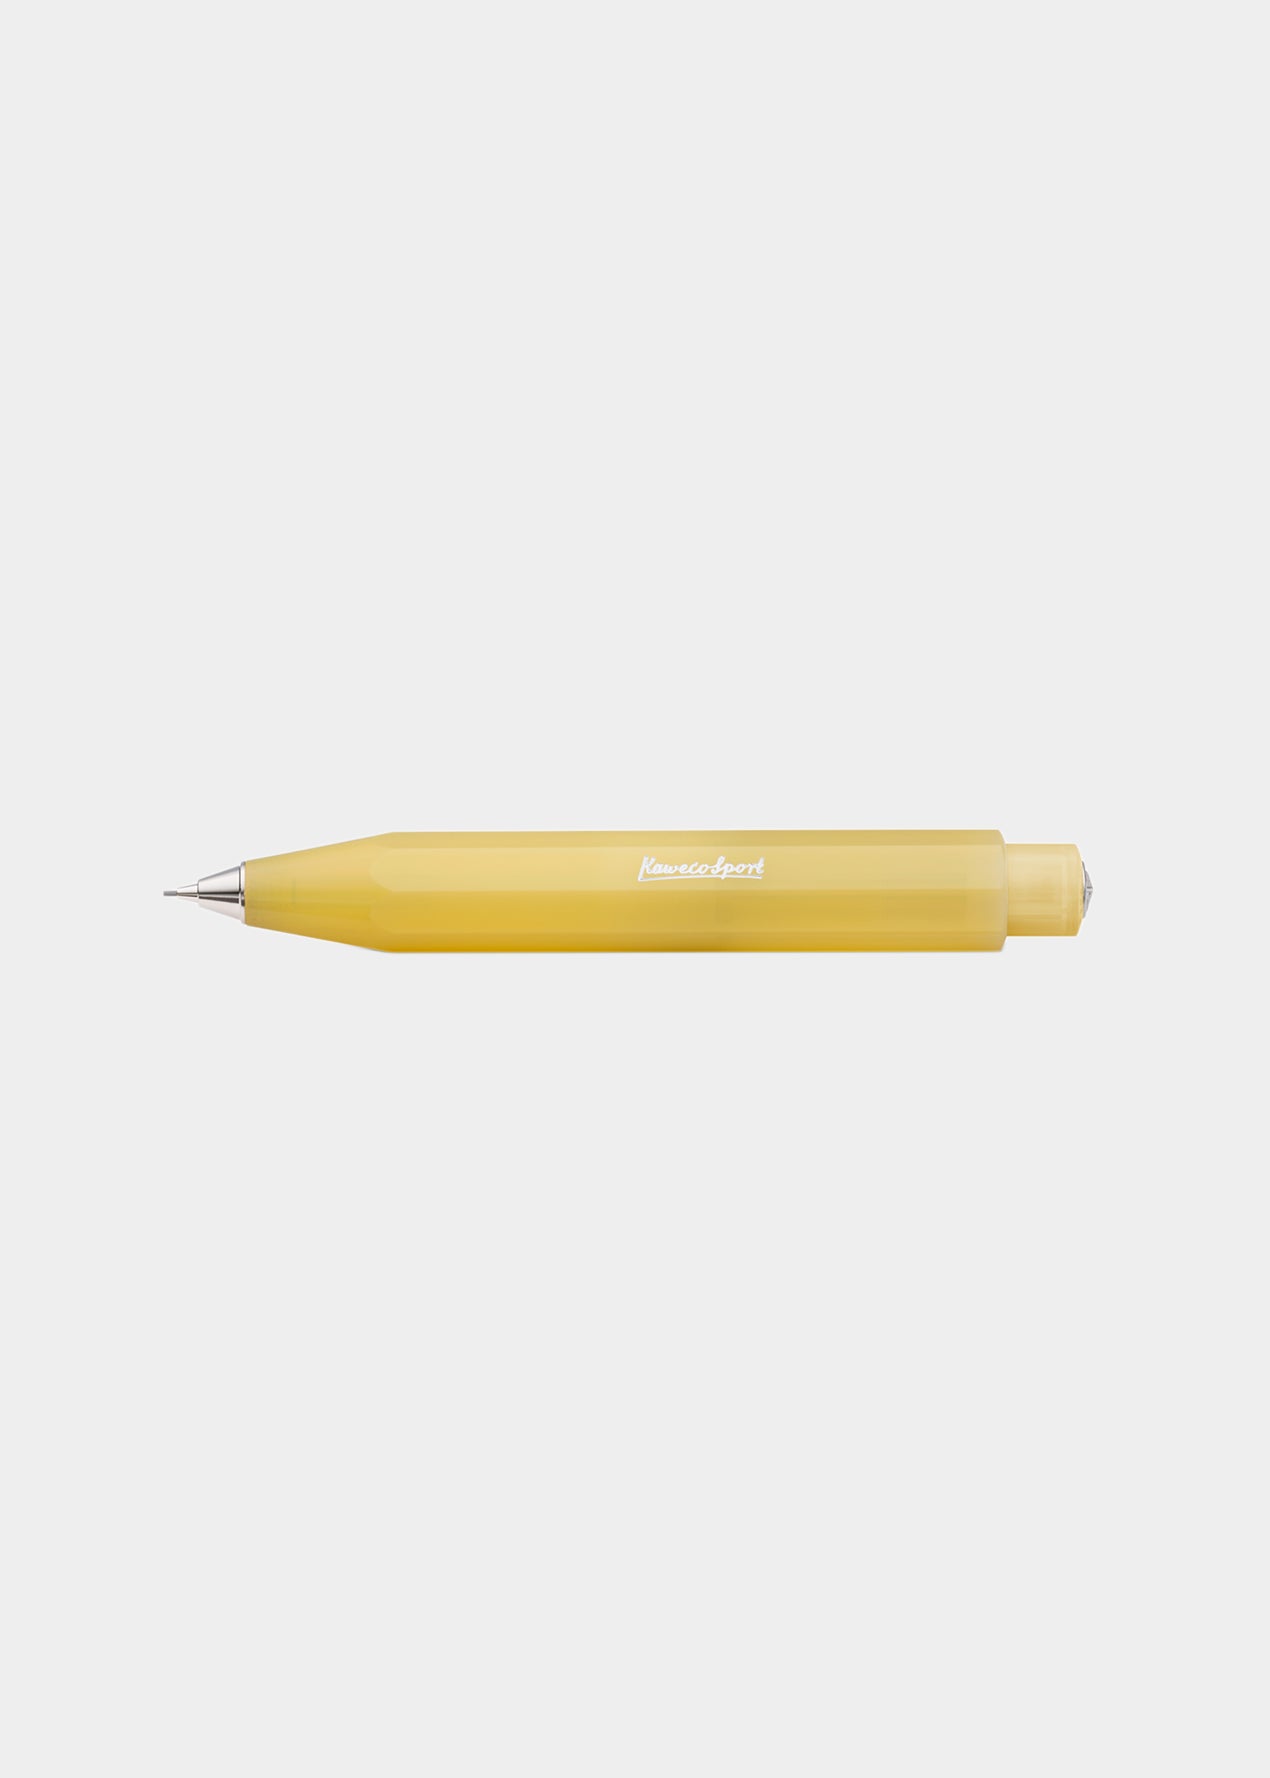 KAWECO FROSTED SPORT PENCIL 0.7MM - BANANA